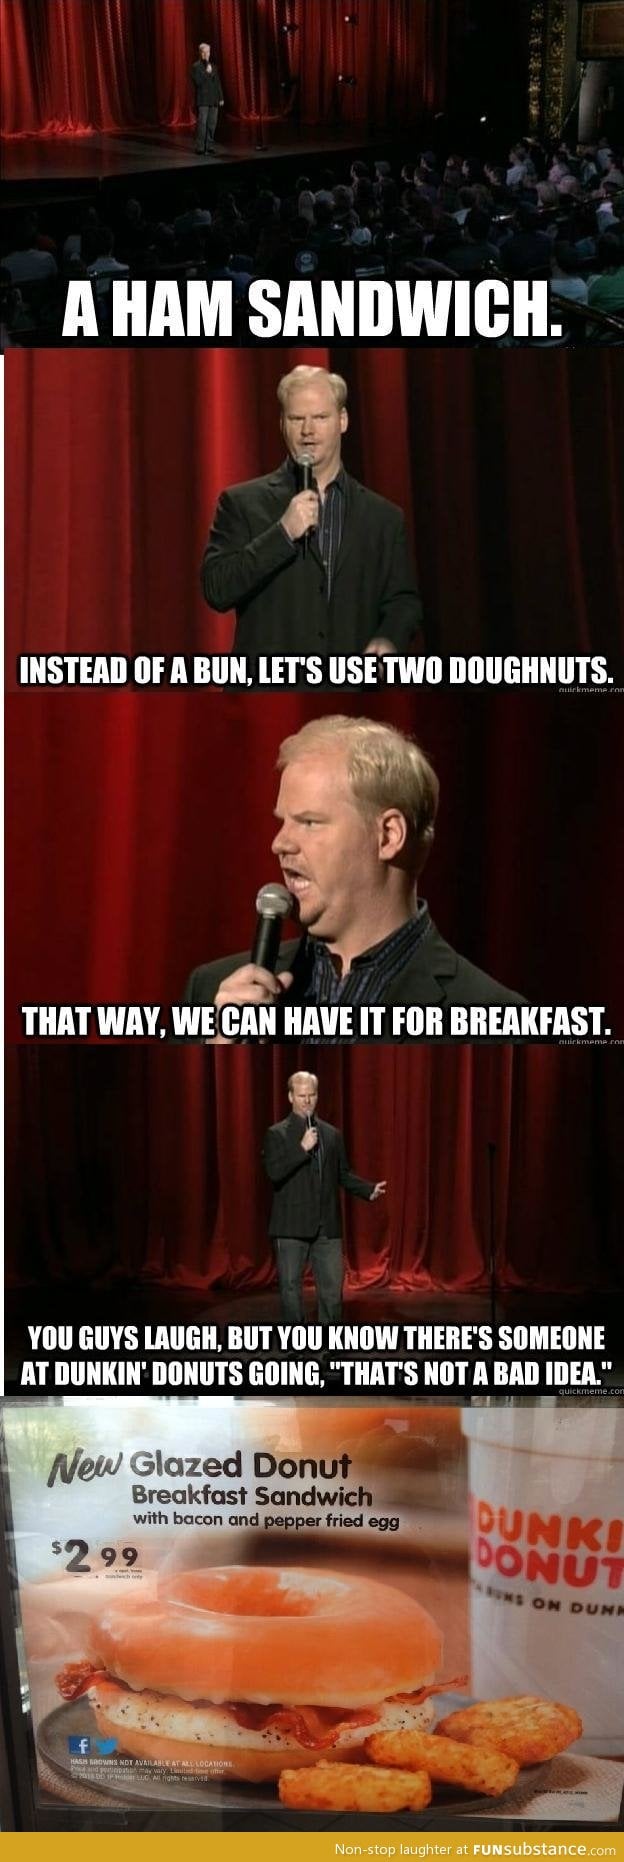 Jim gaffigan near perfectly predicts the future of food